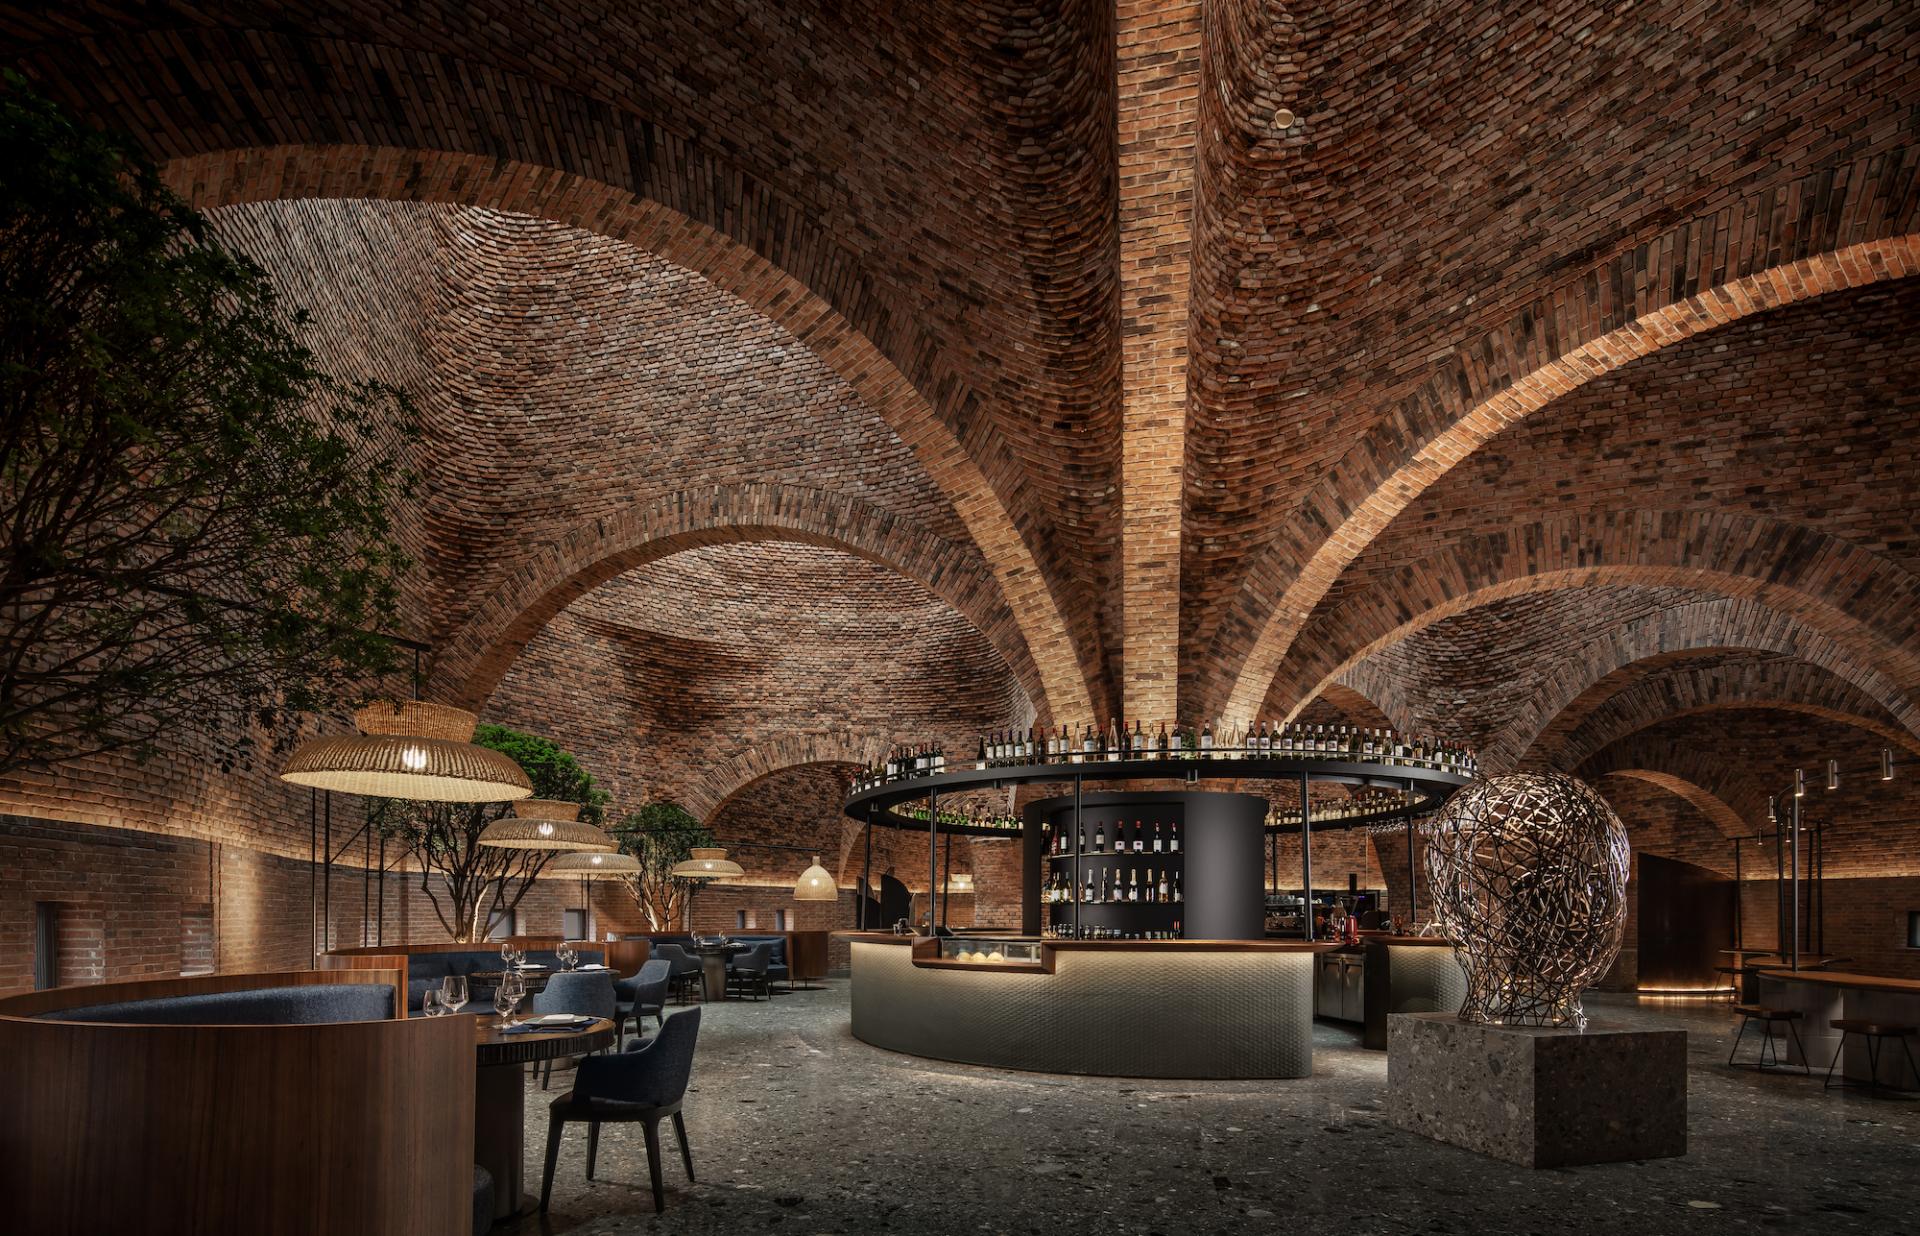 This Restaurant Nestled In A Red Brick Artwork Is A Feast For The Visual Senses